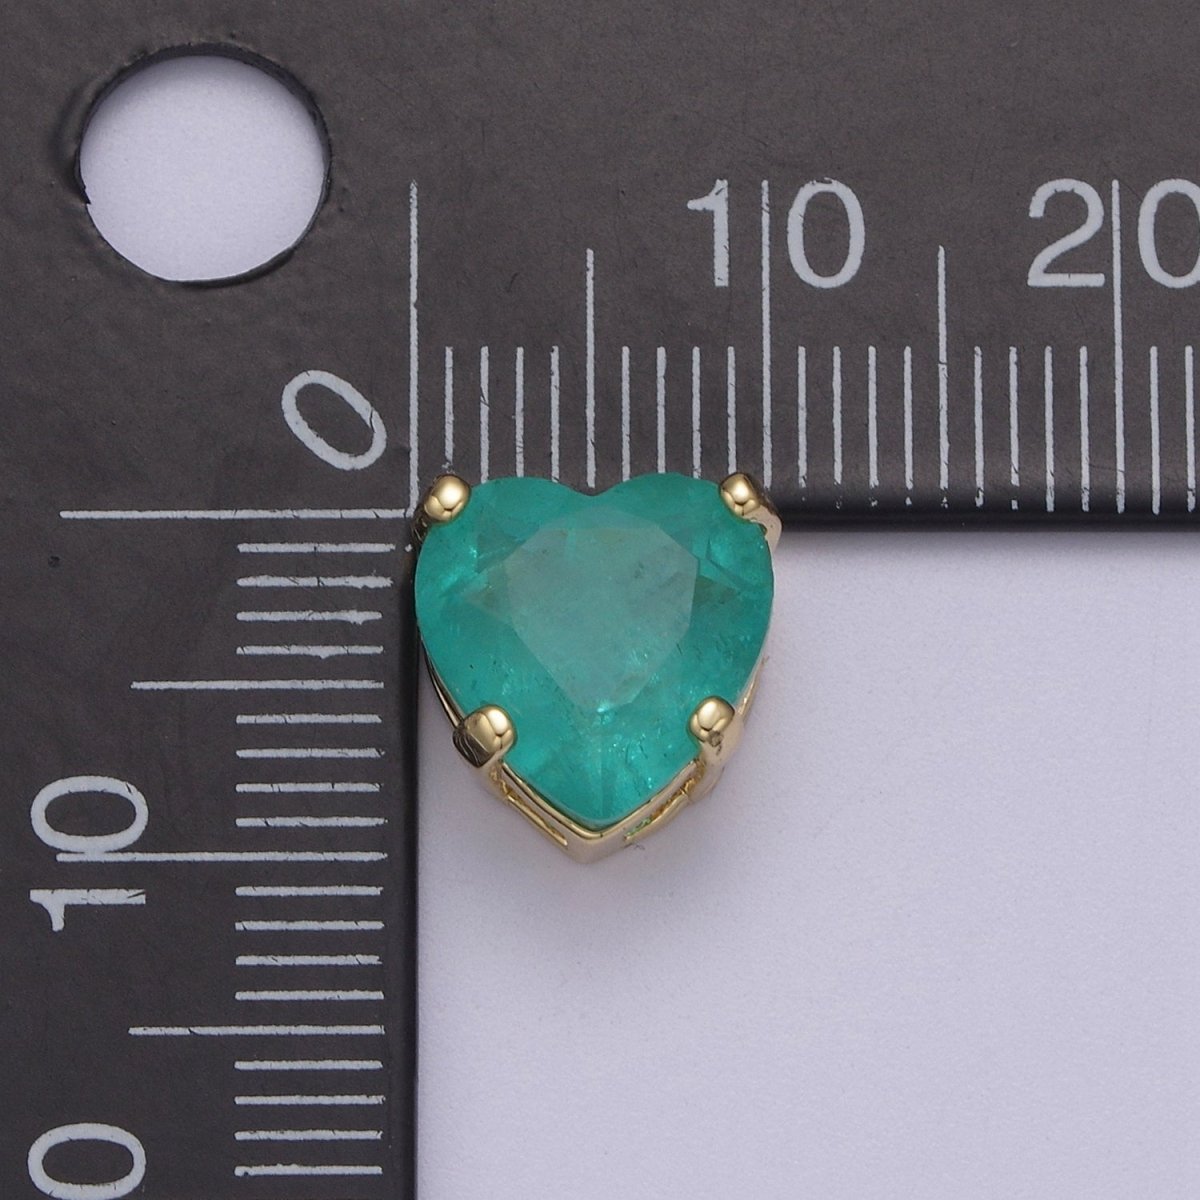 Green Aqua Cubic Zirconia Heart Charm 10mm Small Beautiful Bright 3D Love Jewelry Gold Beads spacer for Bracelet Necklace Supply B-221 - DLUXCA